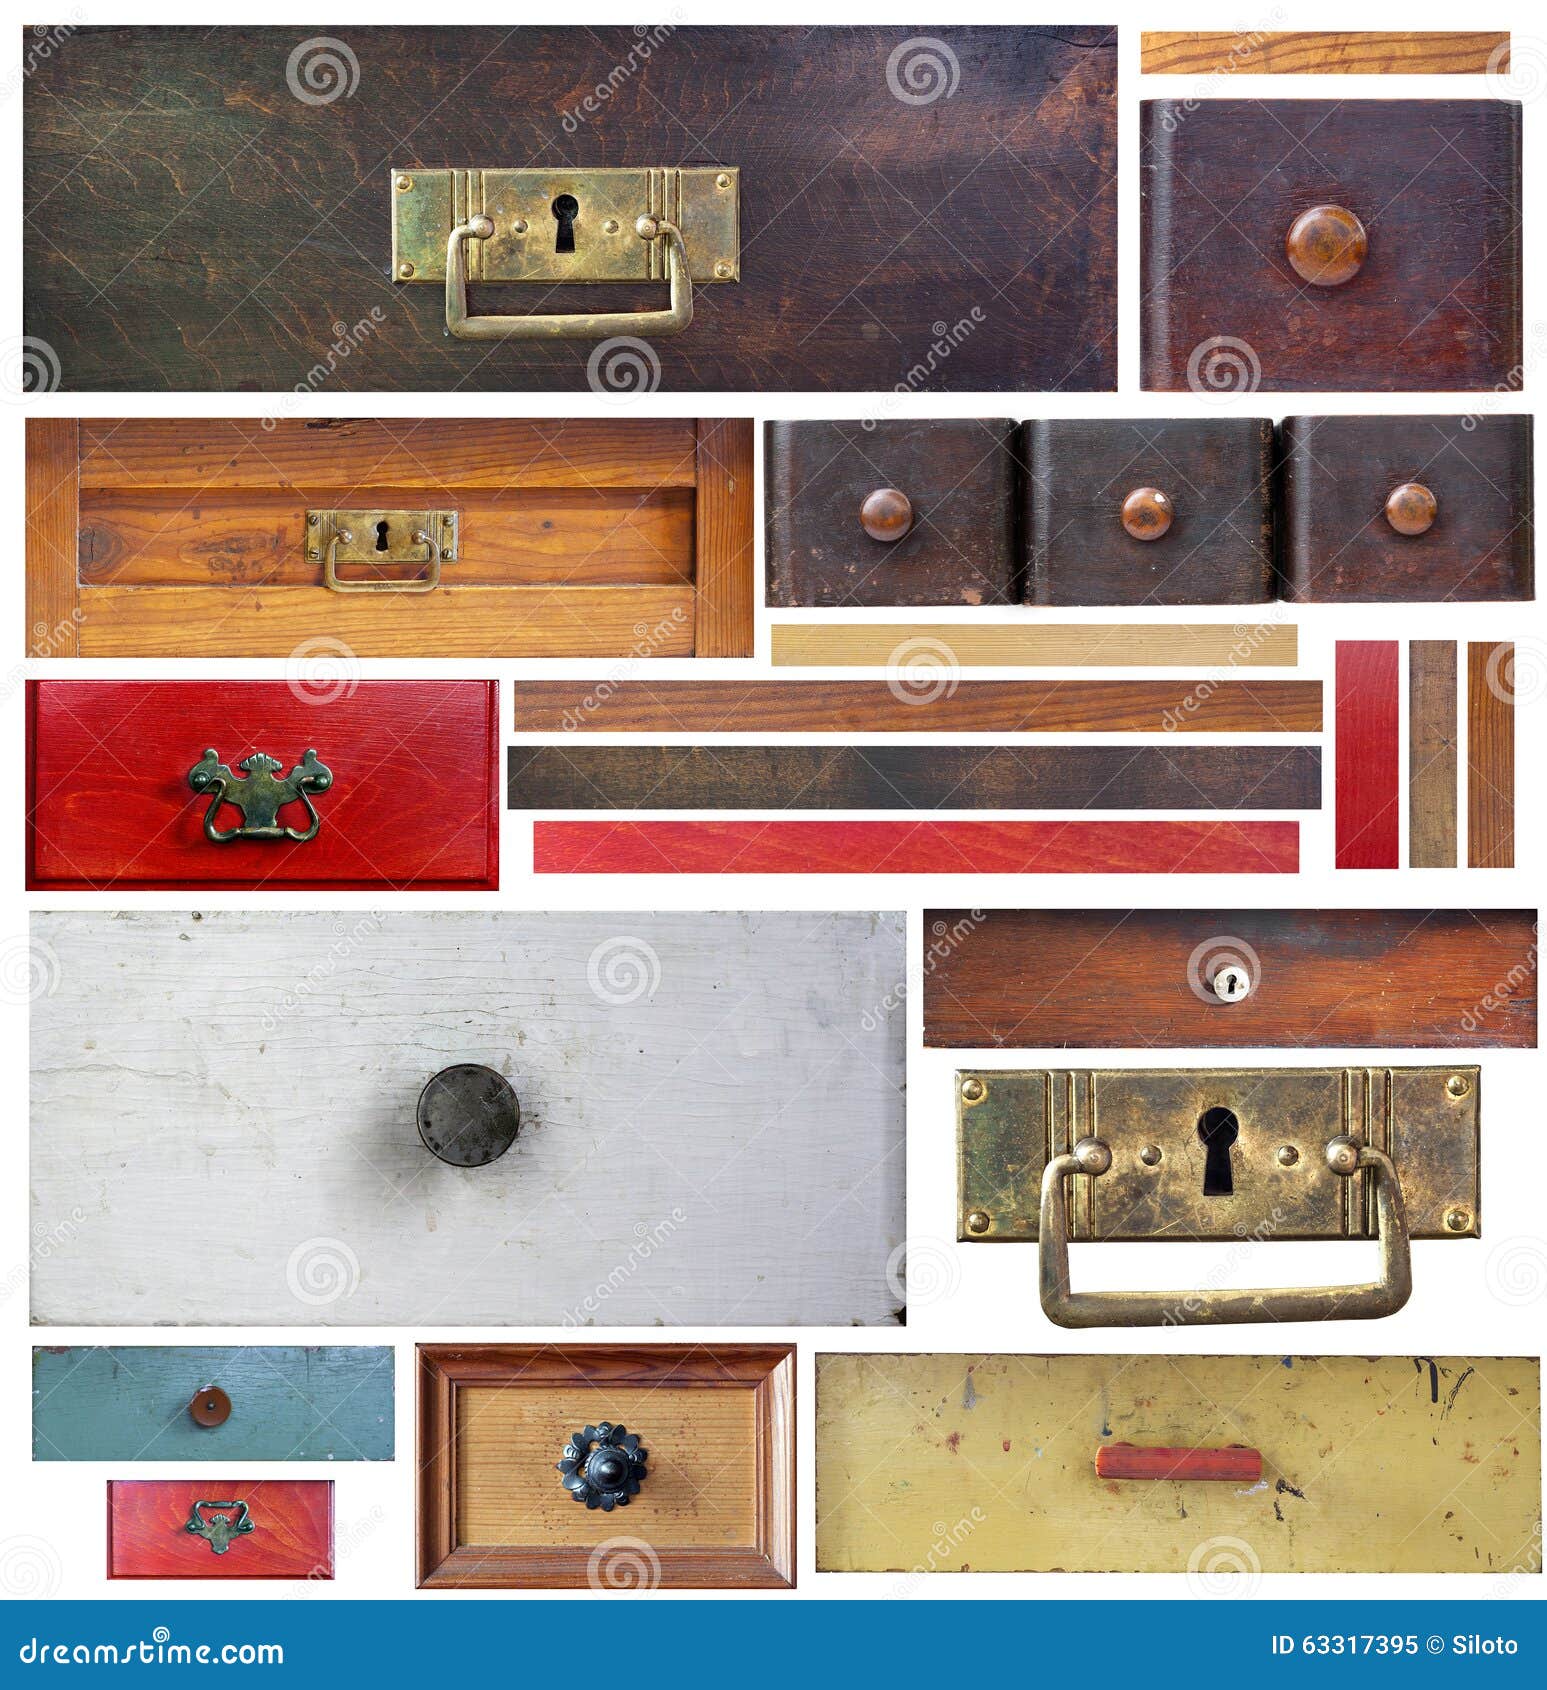 old drawers, wooden strips and escutcheons